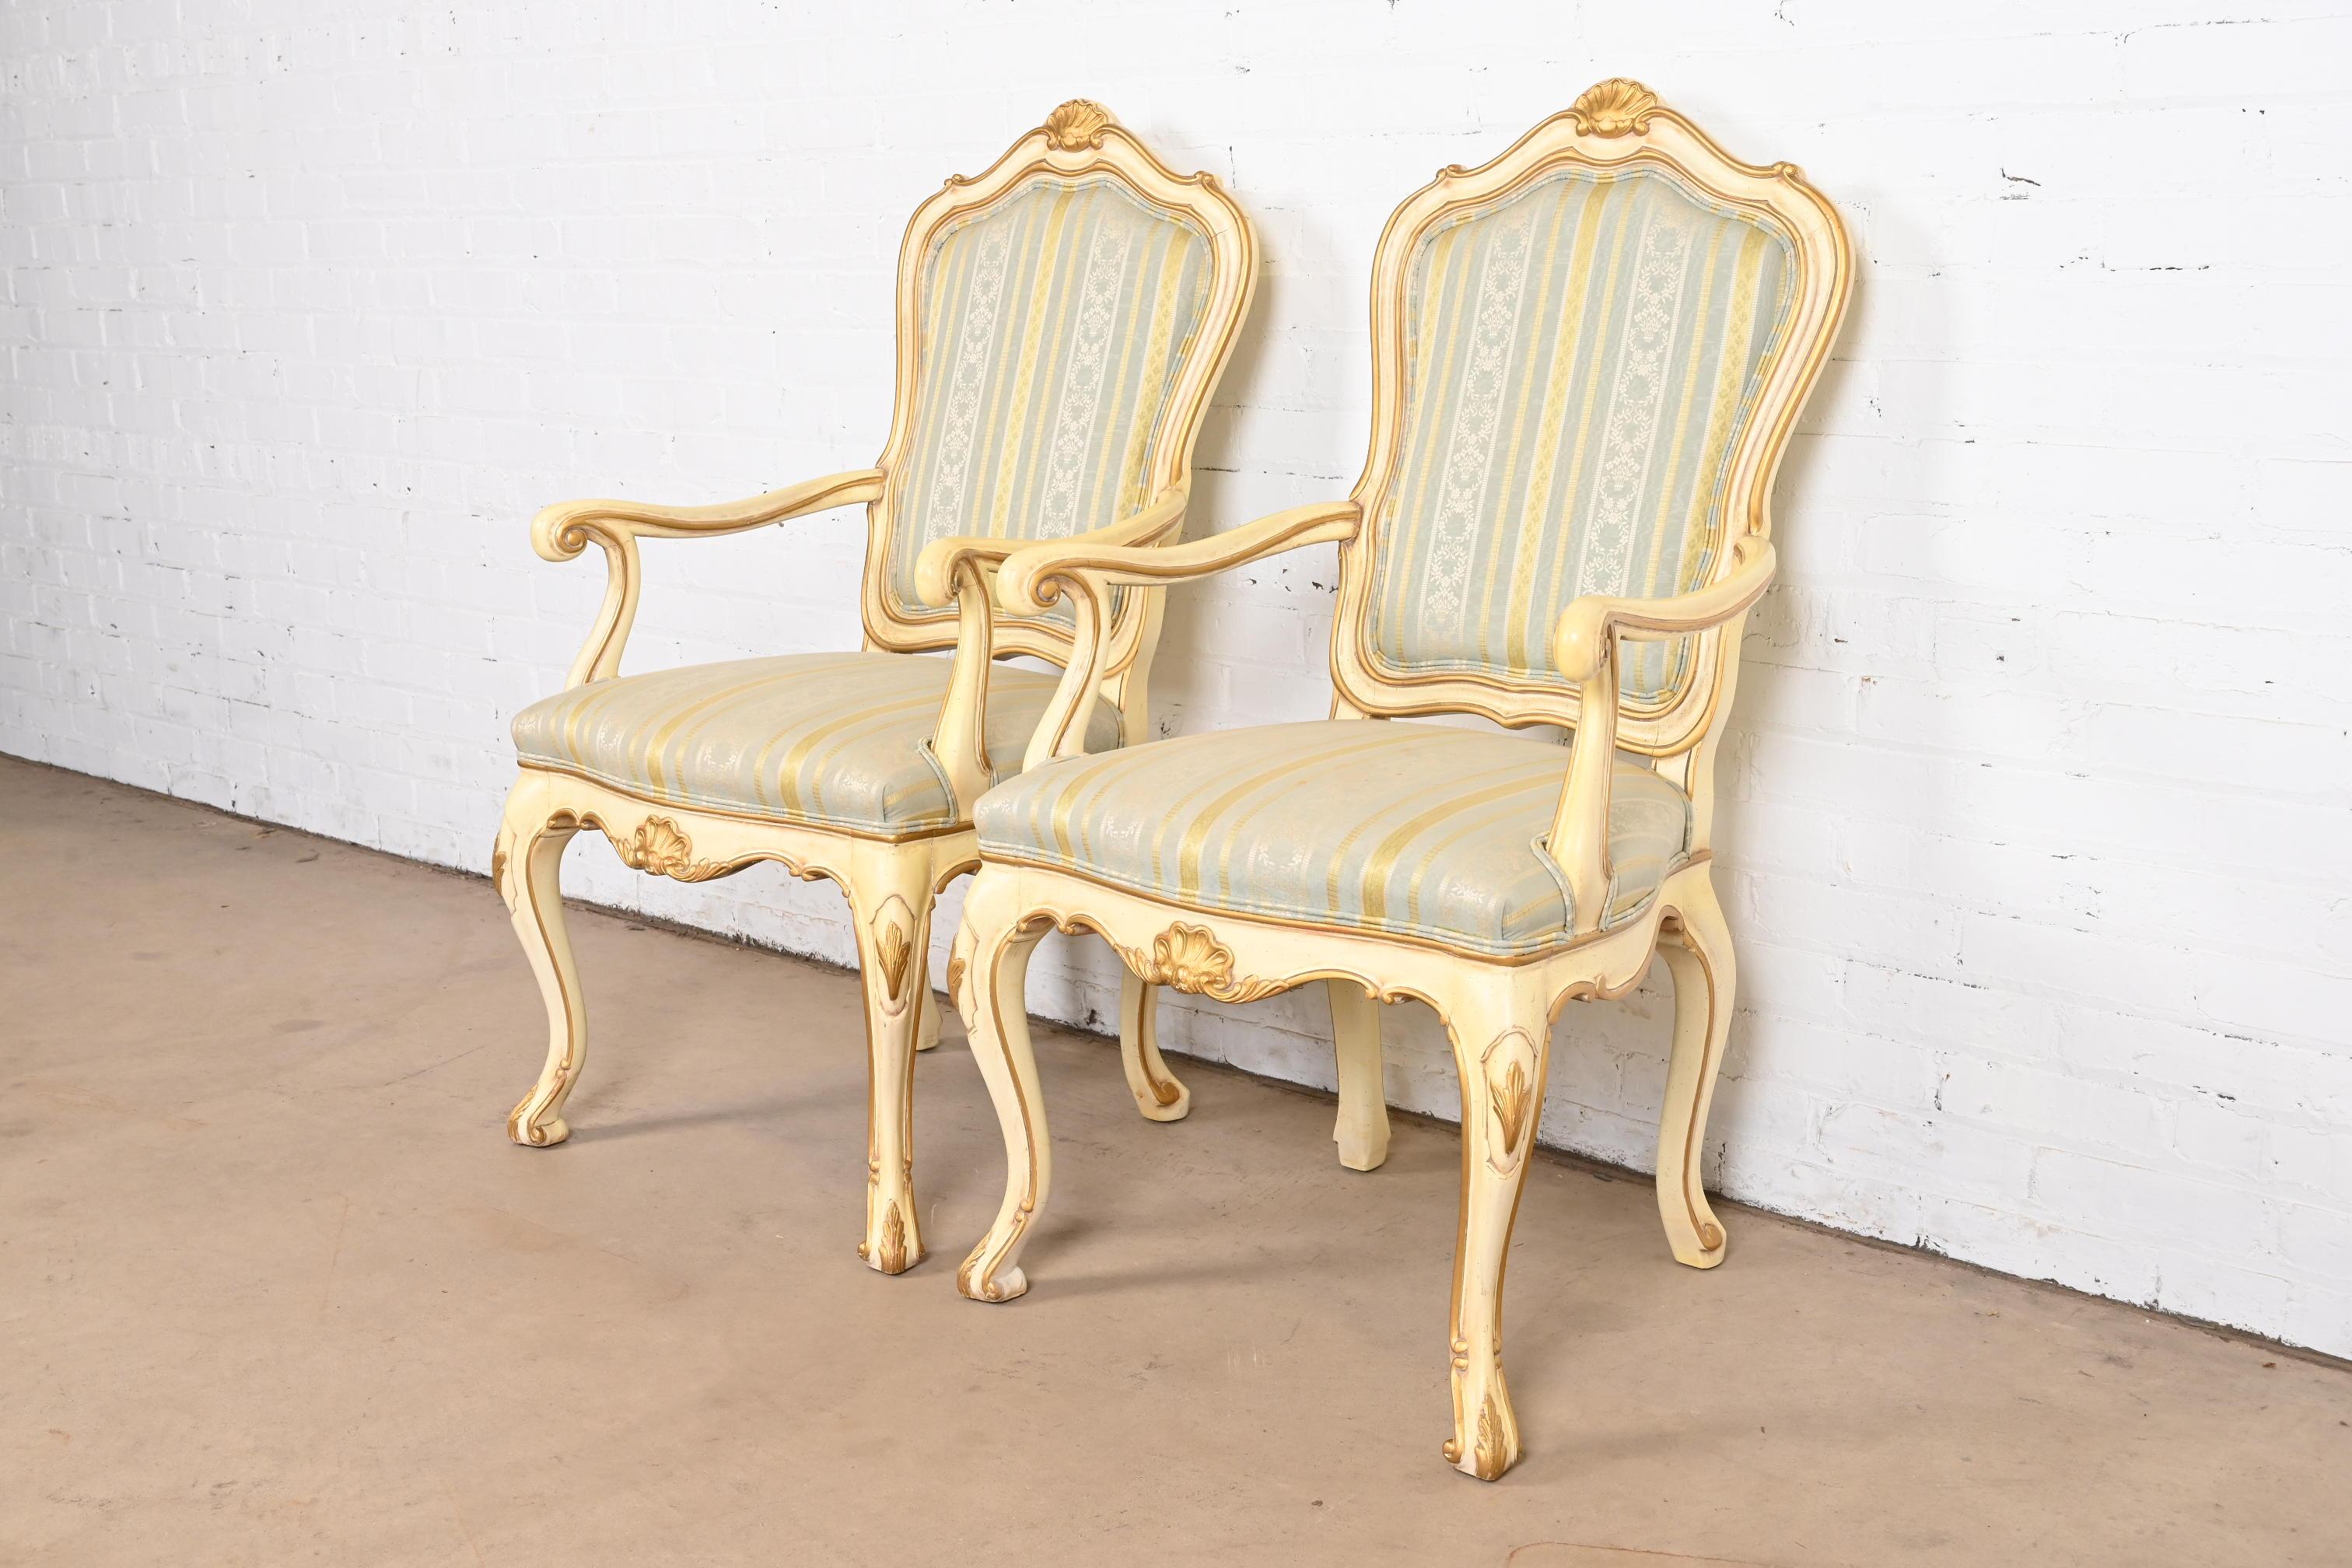 Upholstery Karges French Rococo Louis XV Cream Lacquered and Gold Gilt Fauteuils, Pair